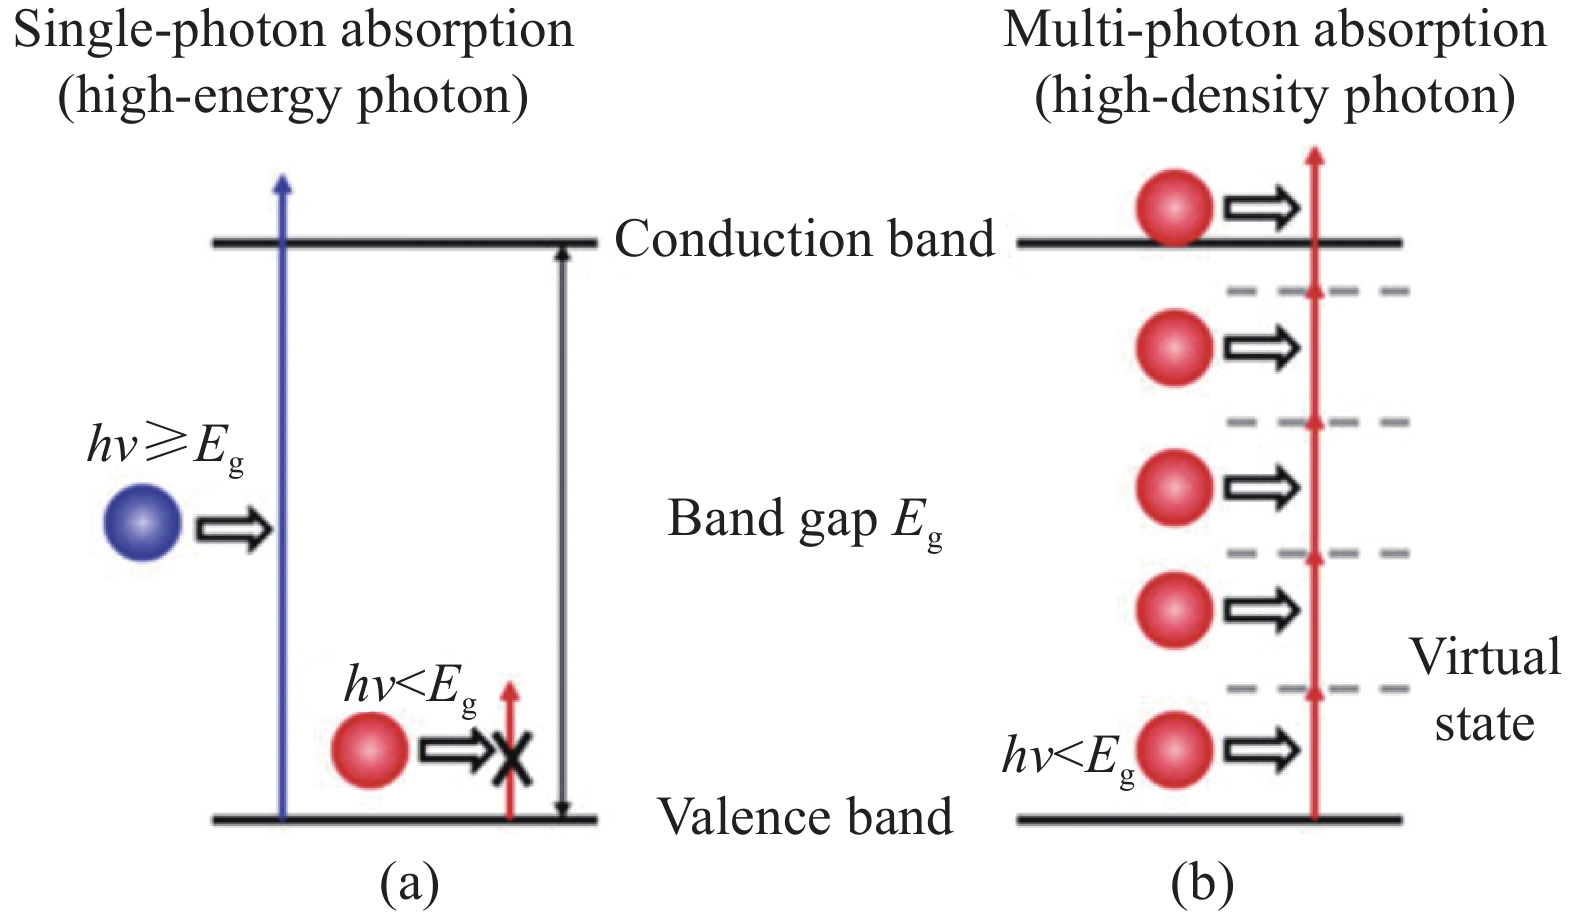 (a) Single photon absorption and (b) multiphoton absorption based on electron excitation processes in bandgap materials[13]